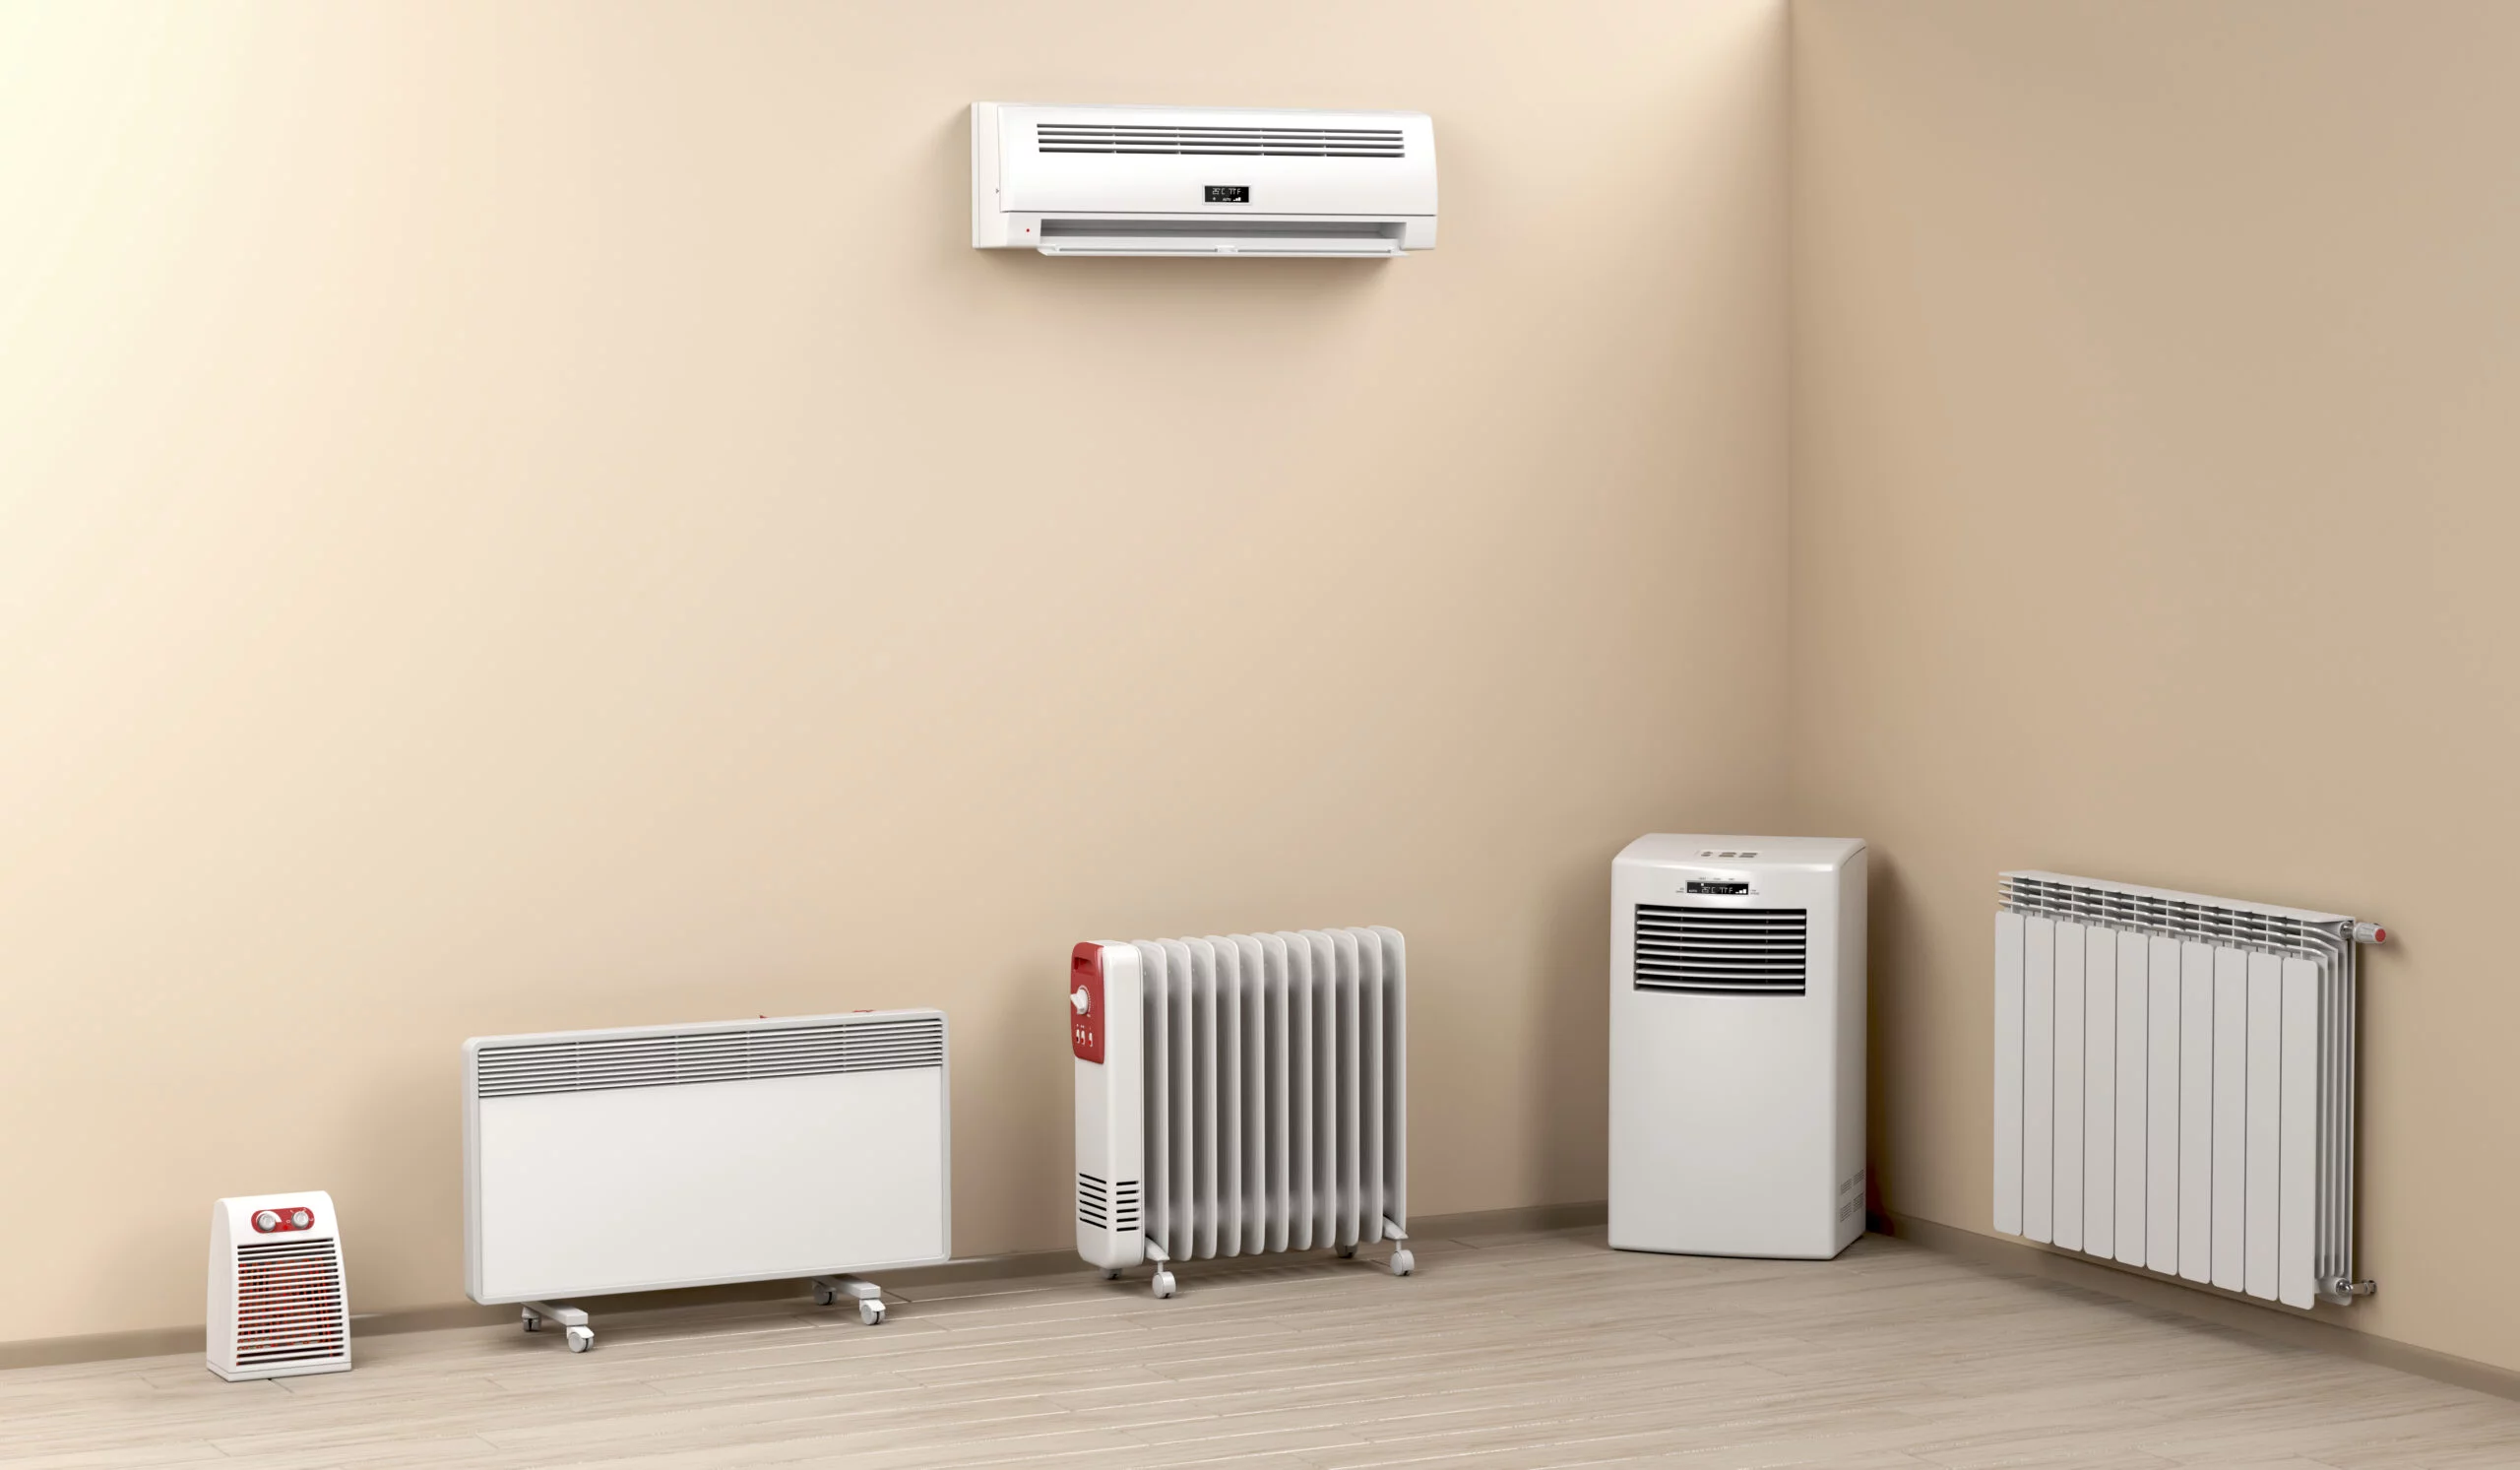 Is It Better To Use A Space Heater Or Central Heat?